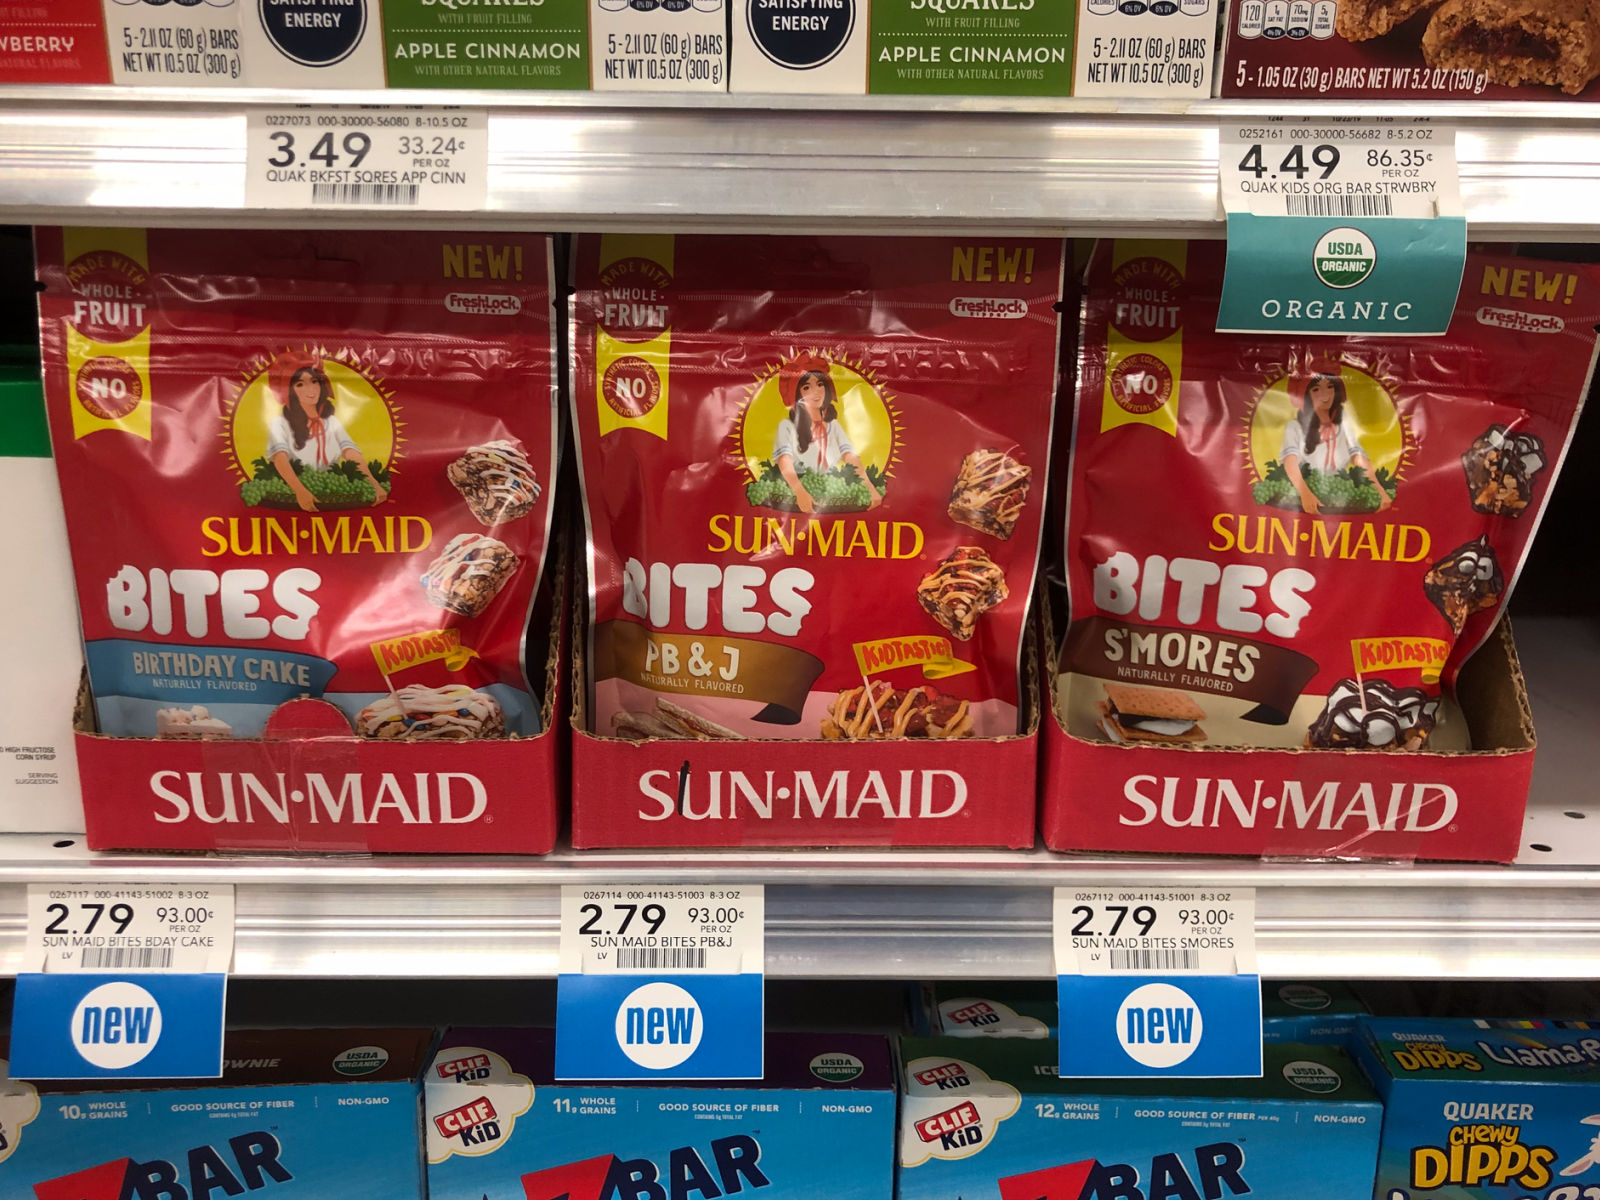 Pick Up Savings On Delicious New Sun-Maid Bites At Publix on I Heart Publix